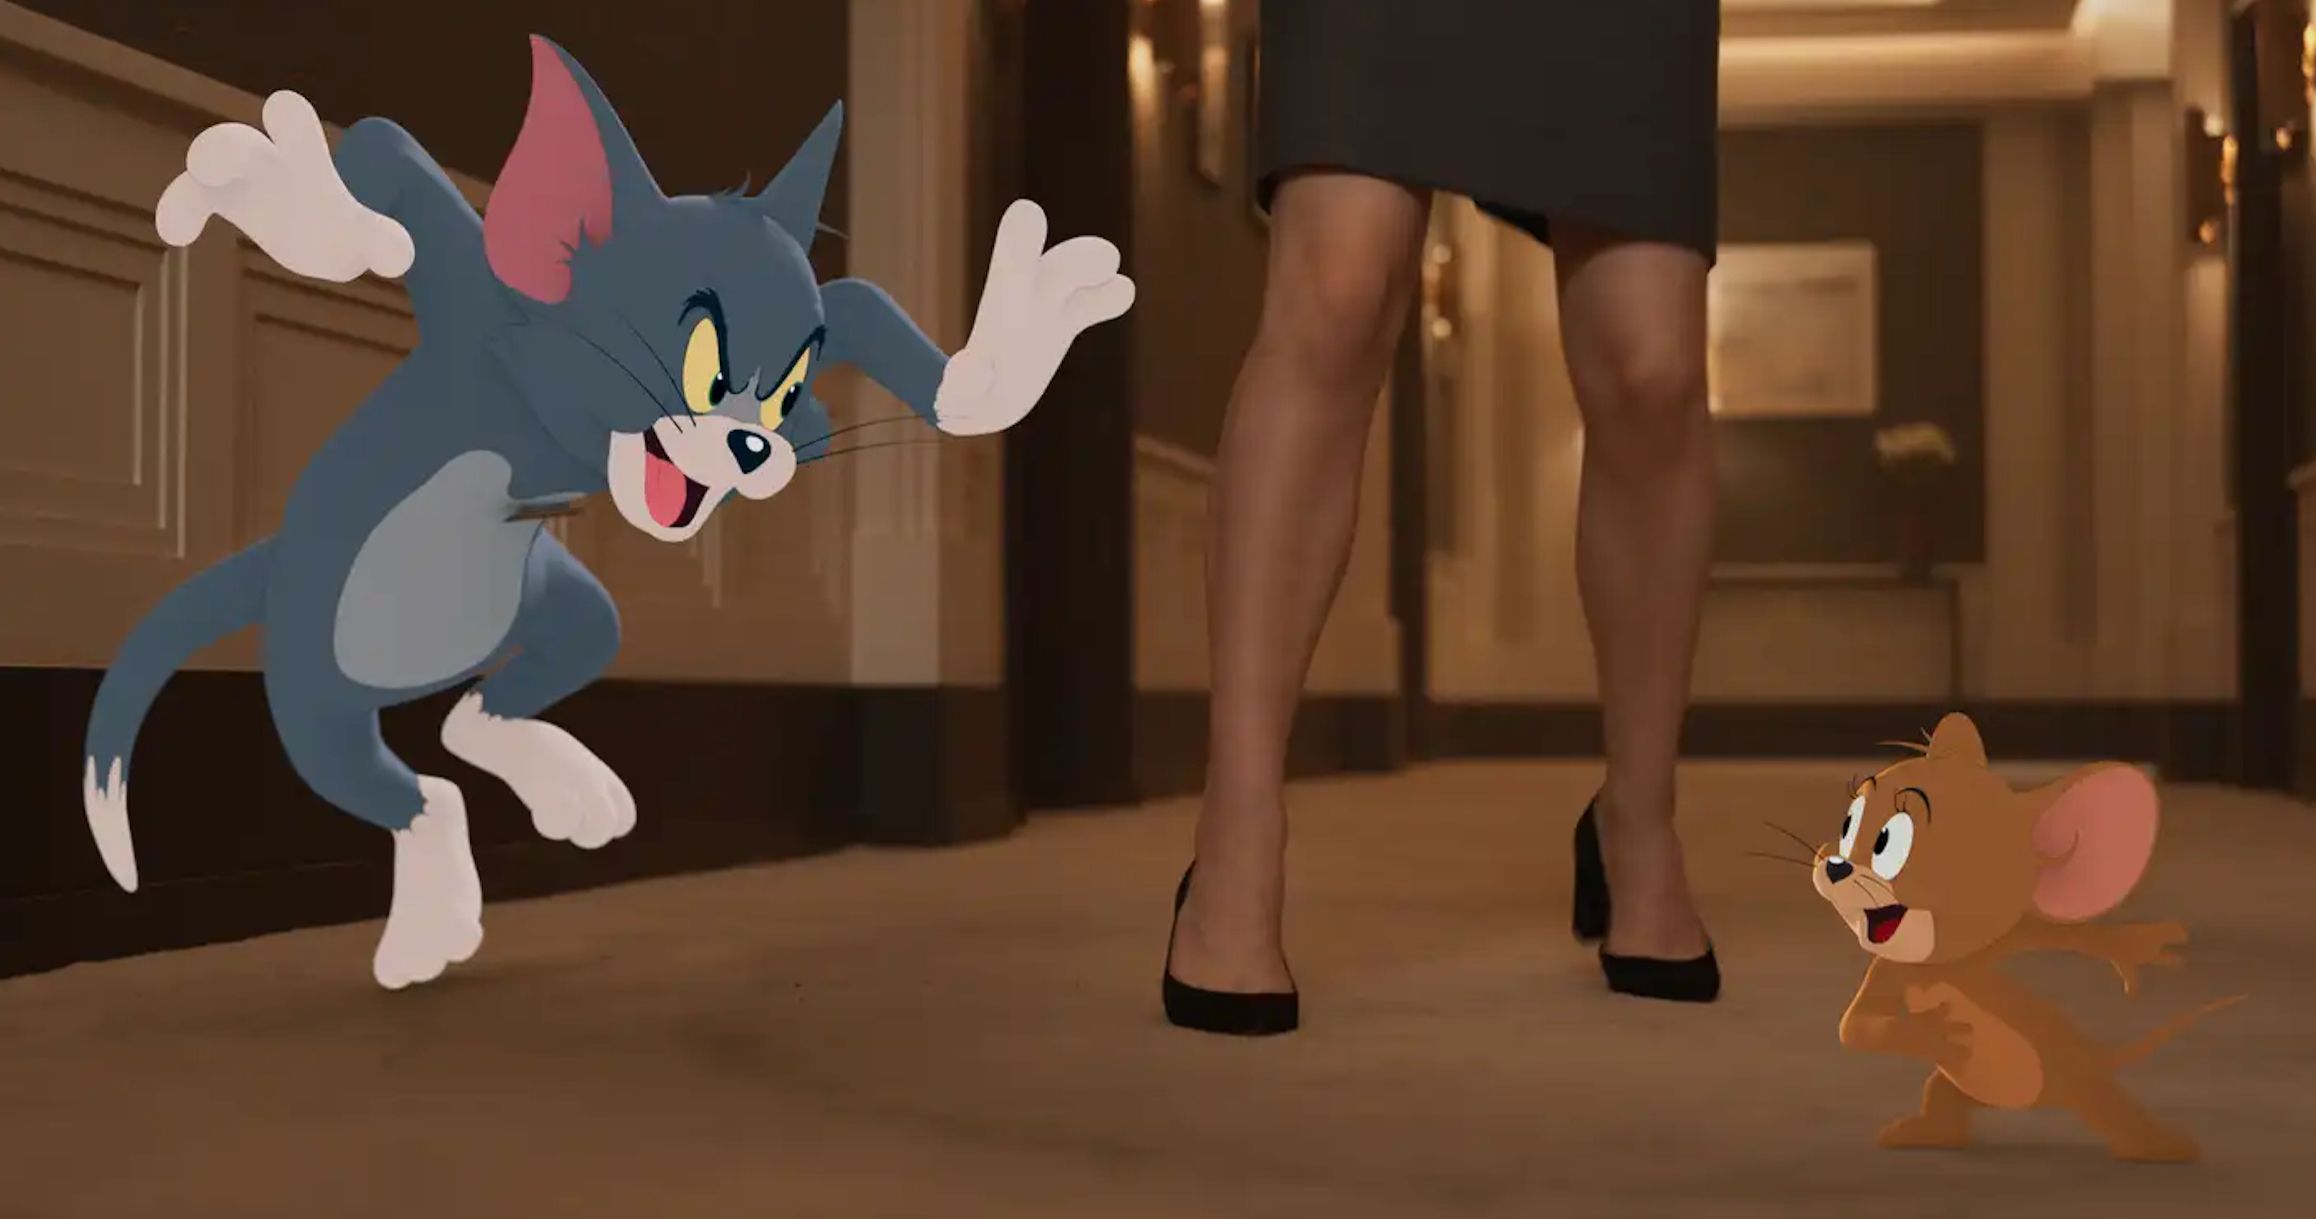 Tom & Jerry Review: A Live-Action Hipster Remake That's Strictly for Kids